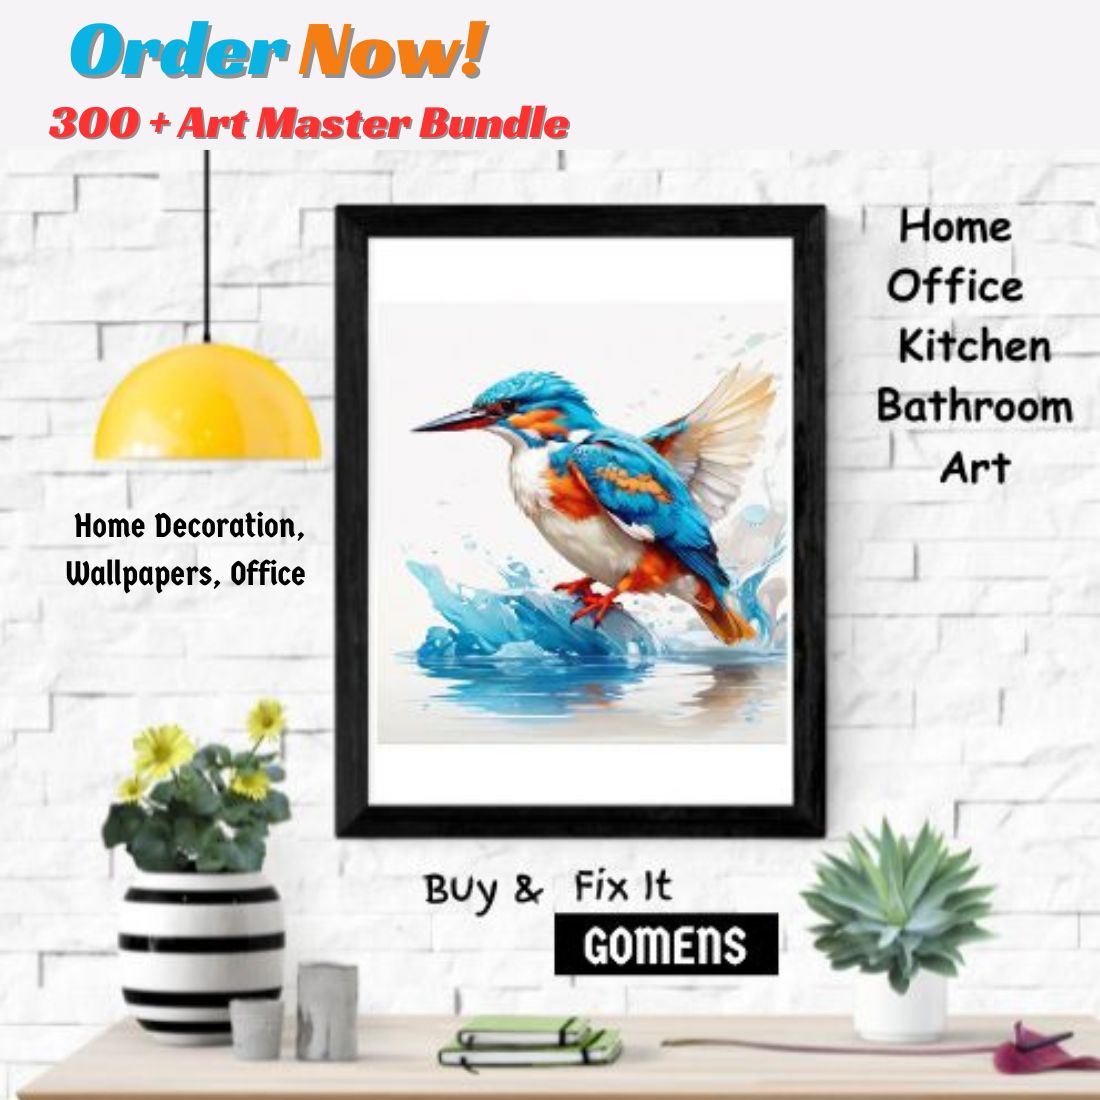 Unique Animal Art 300 Plus Master Bundle Worldwide Buy Now - On Latest Low Price cover image.